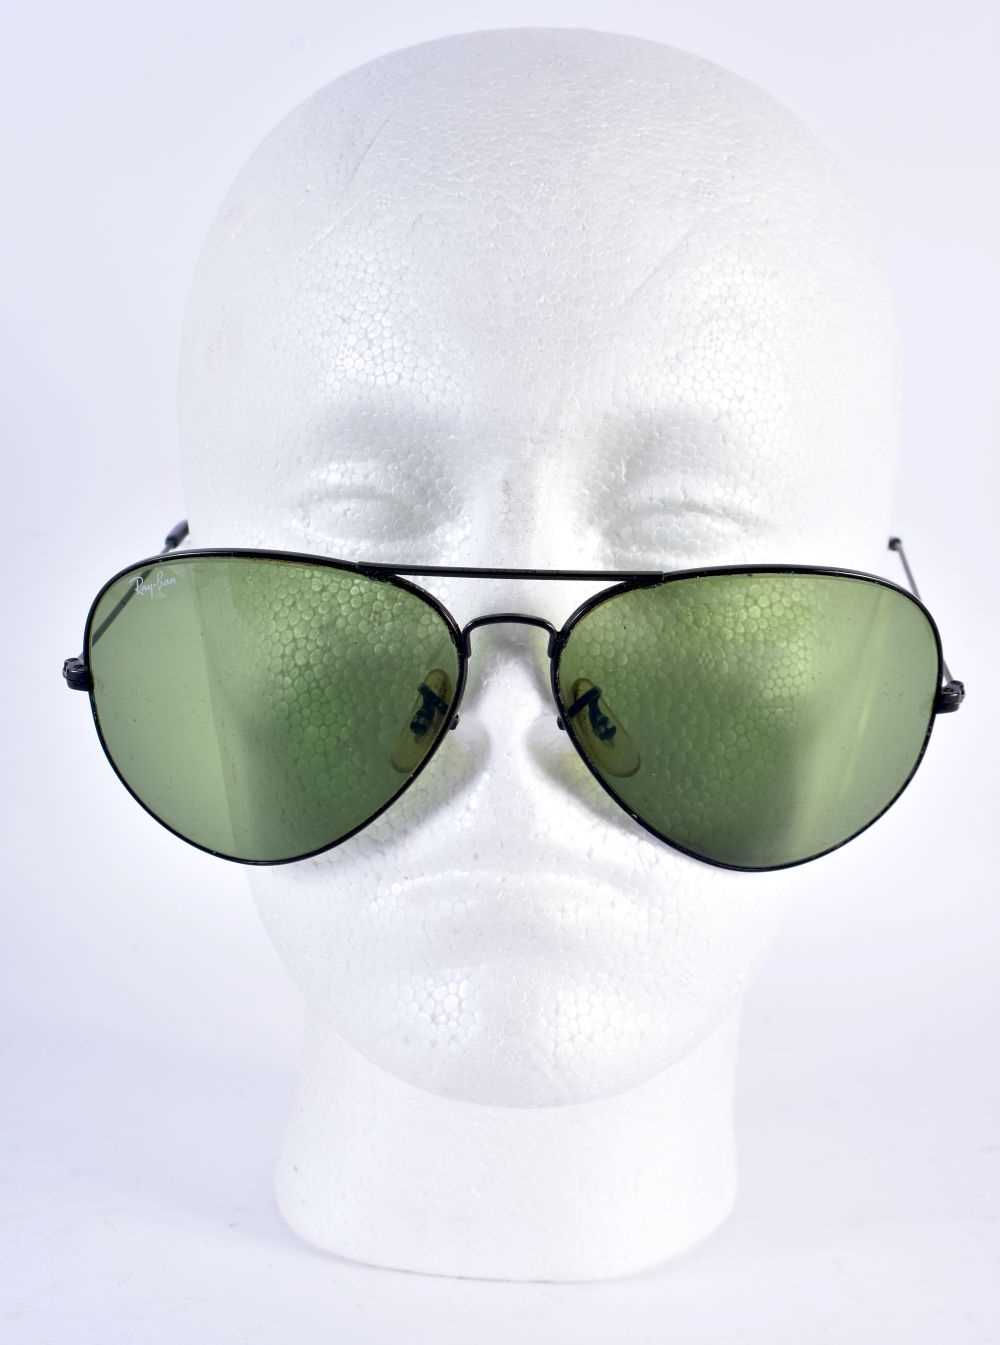 FOUR PAIRS OF RAYBAN SUNGLASSES. 15 cm wide. (4) - Image 8 of 9